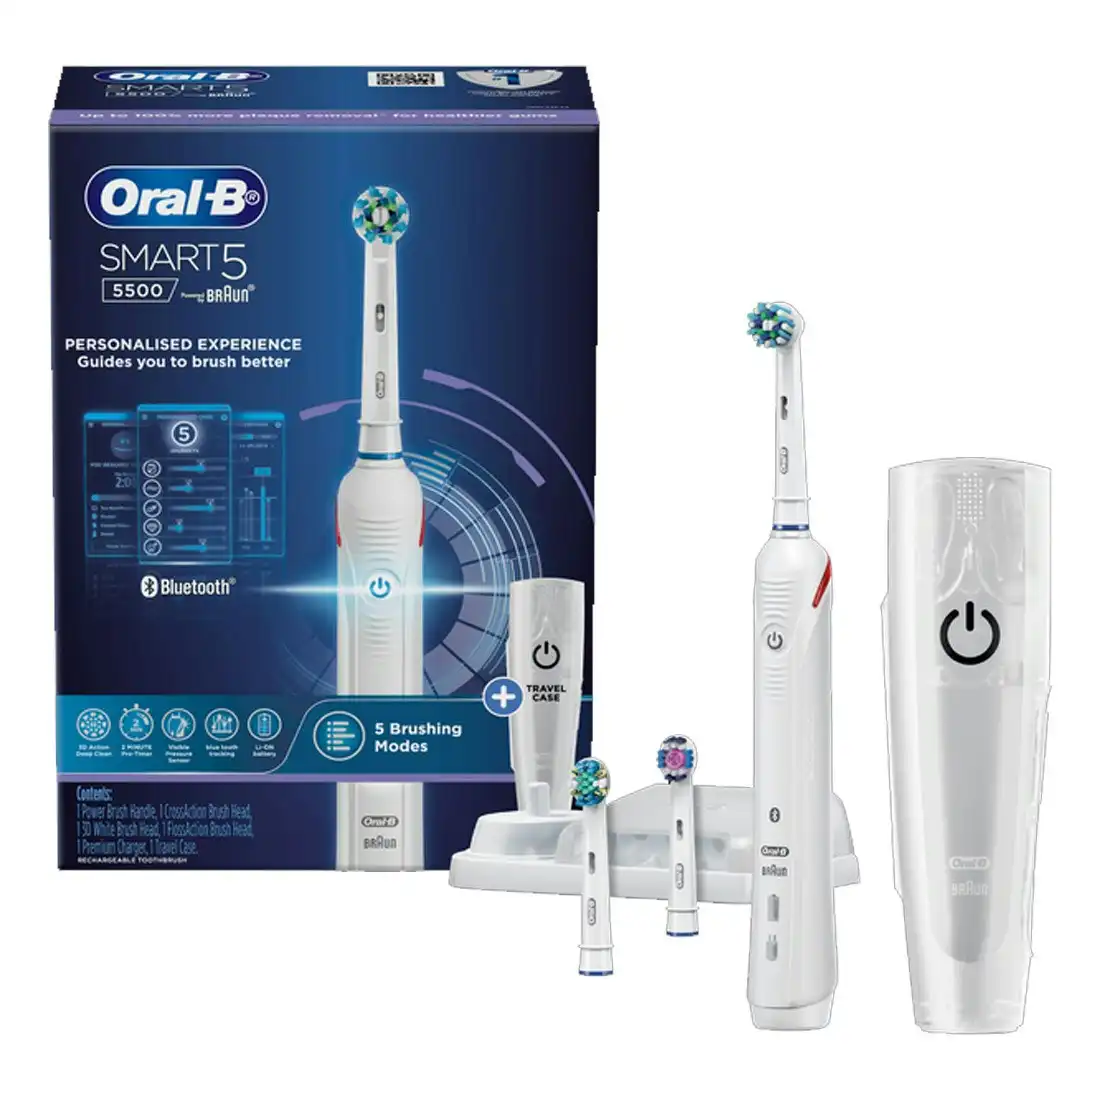 Oral-B SMART 5500 Electric Toothbrush +3 Refills with Travel Case - White